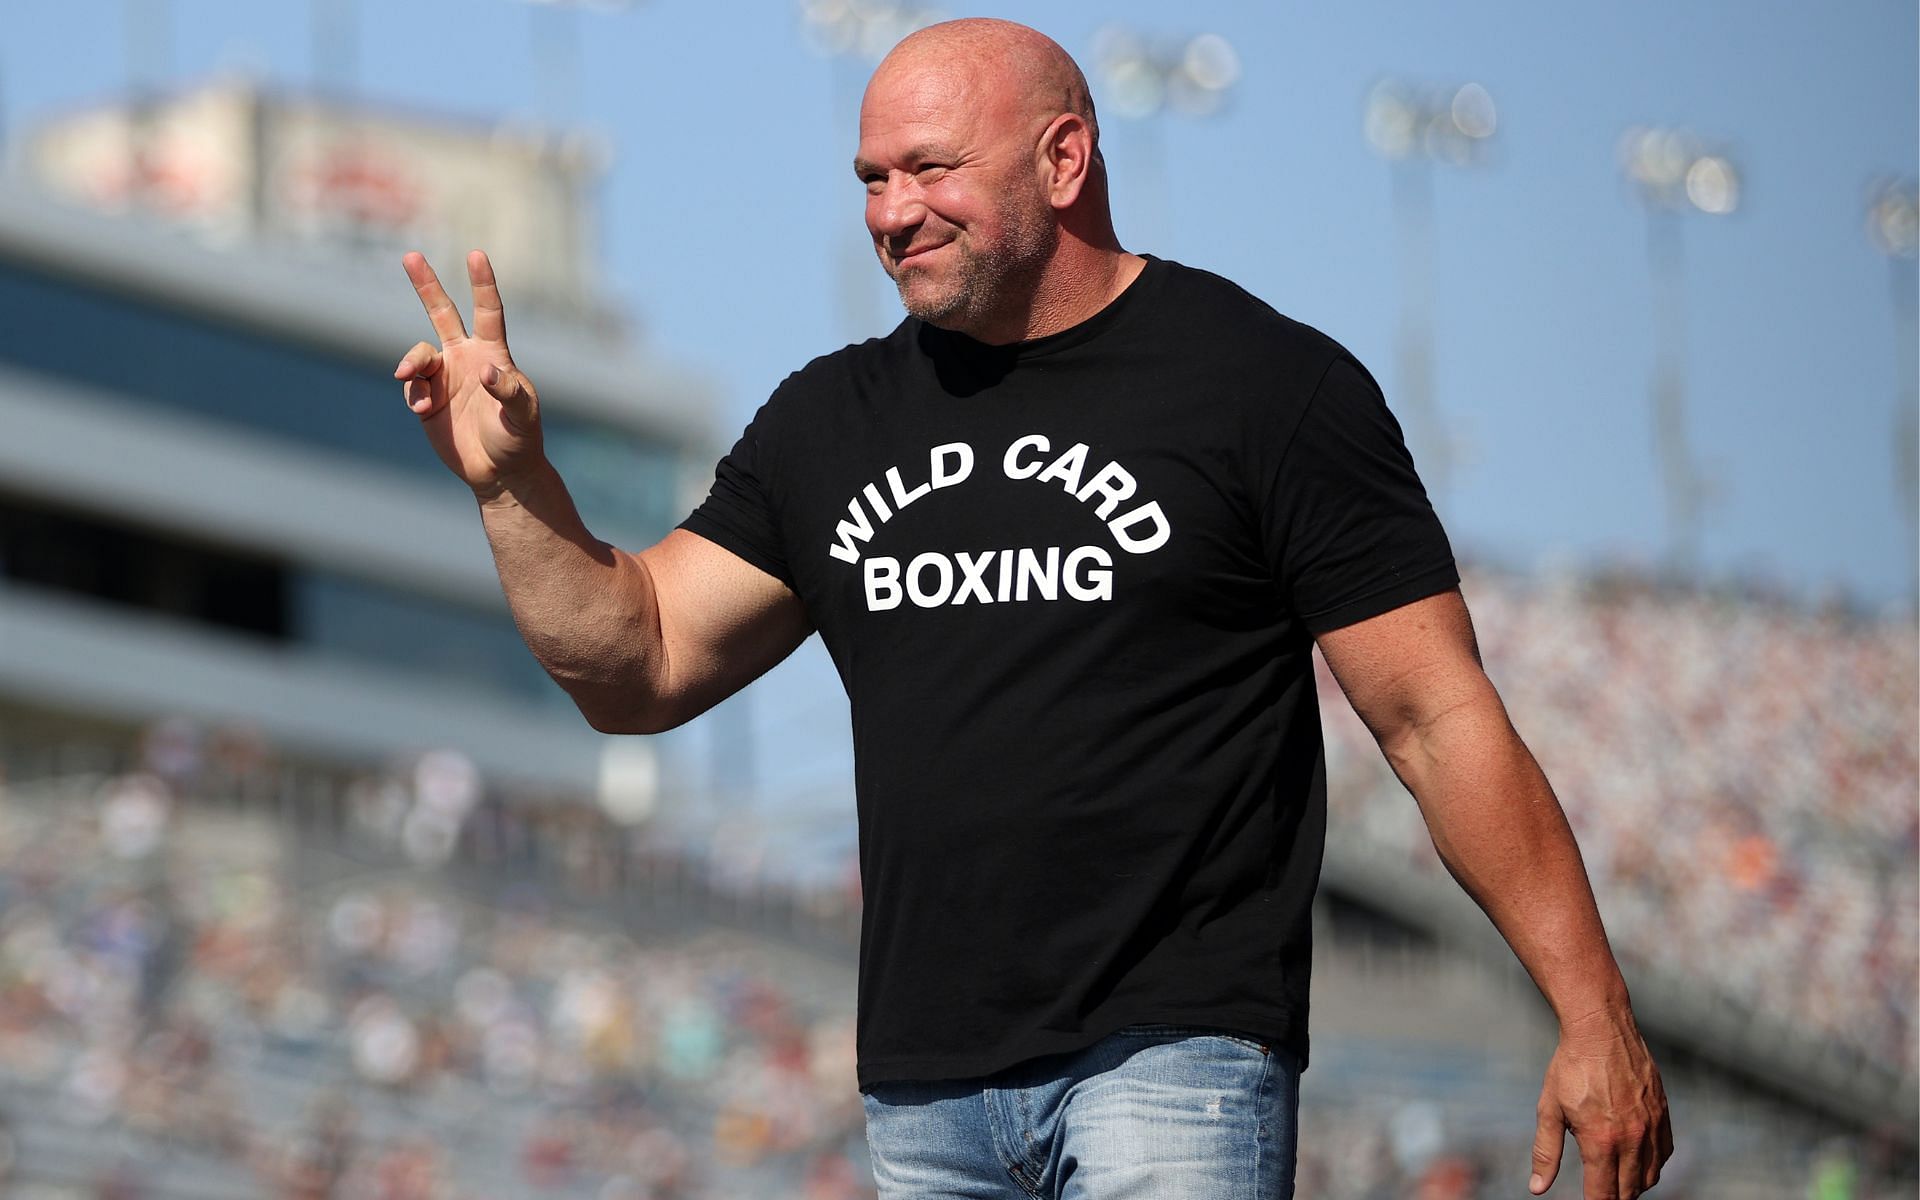 The UFC president shares insight into his life-altering food regime